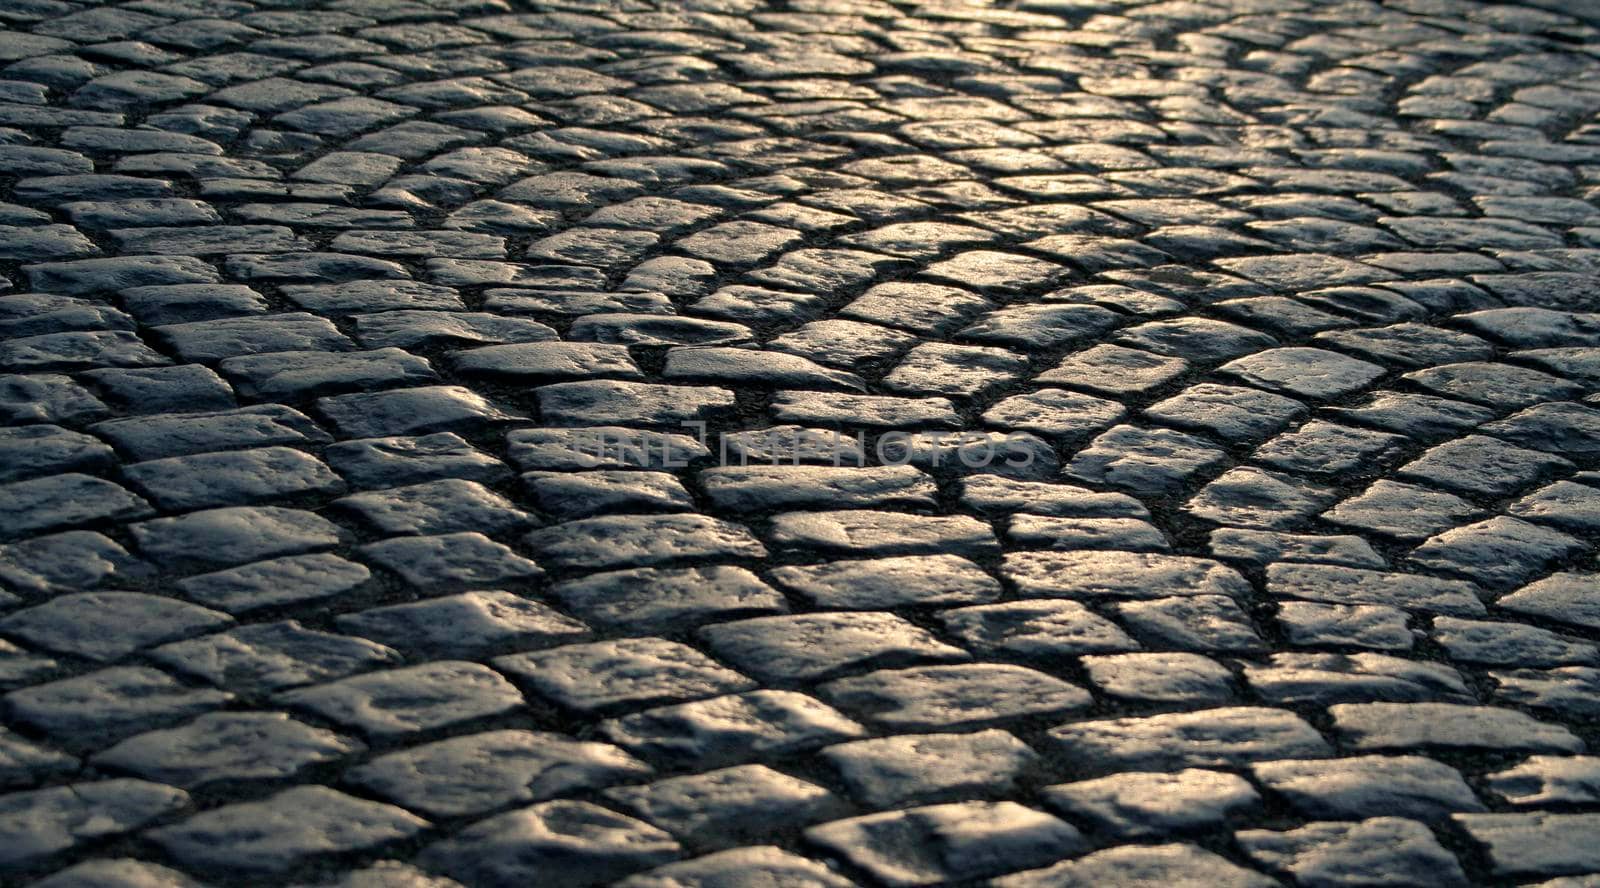 Close-up of the old pavement stones in dark colors